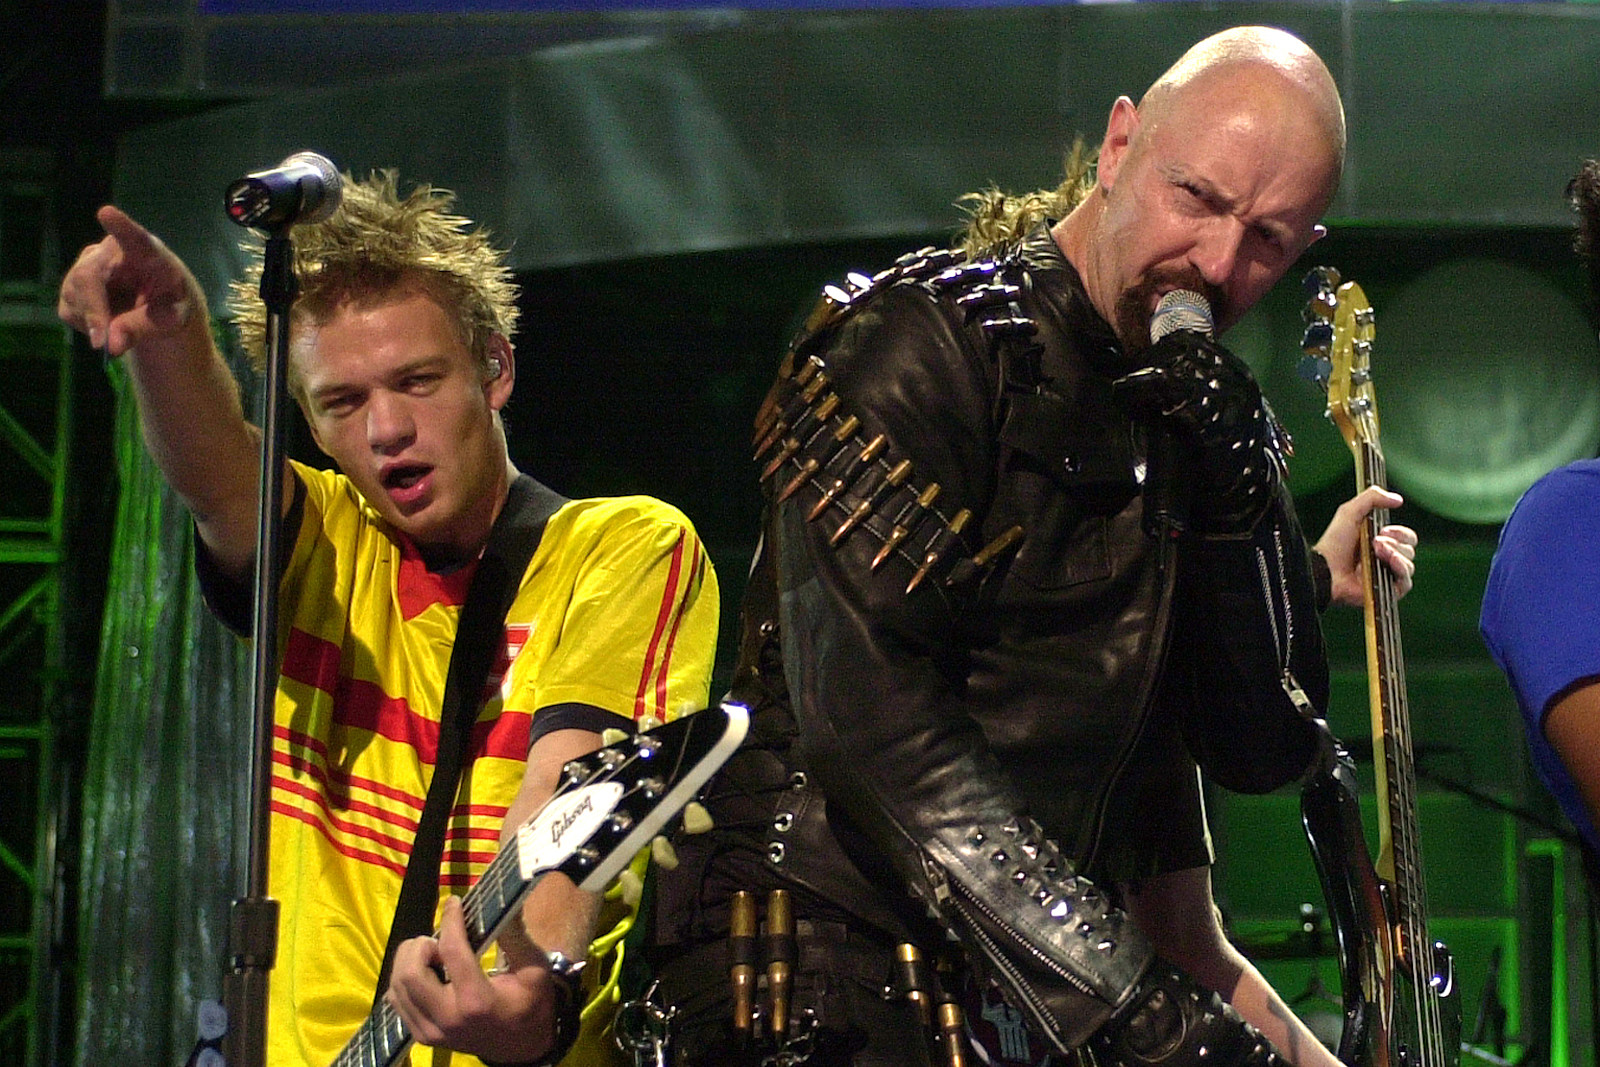 Sum 41’s Life-Changing Performance With Rob Halford and Tommy Lee